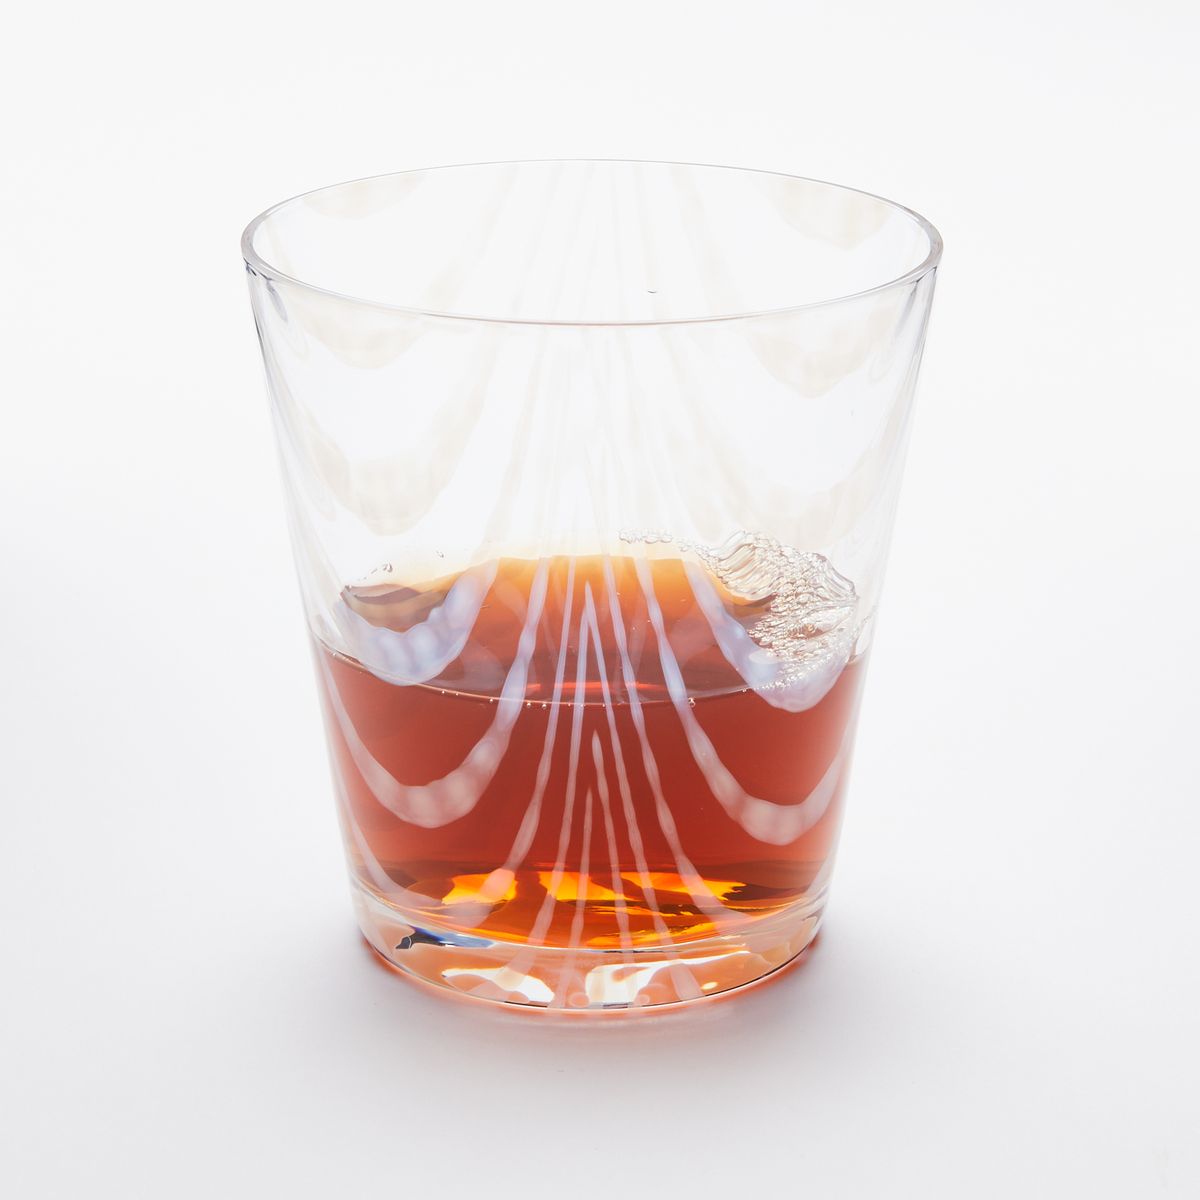 A short clear glass with a delicate ripple pattern, half filled with a drink